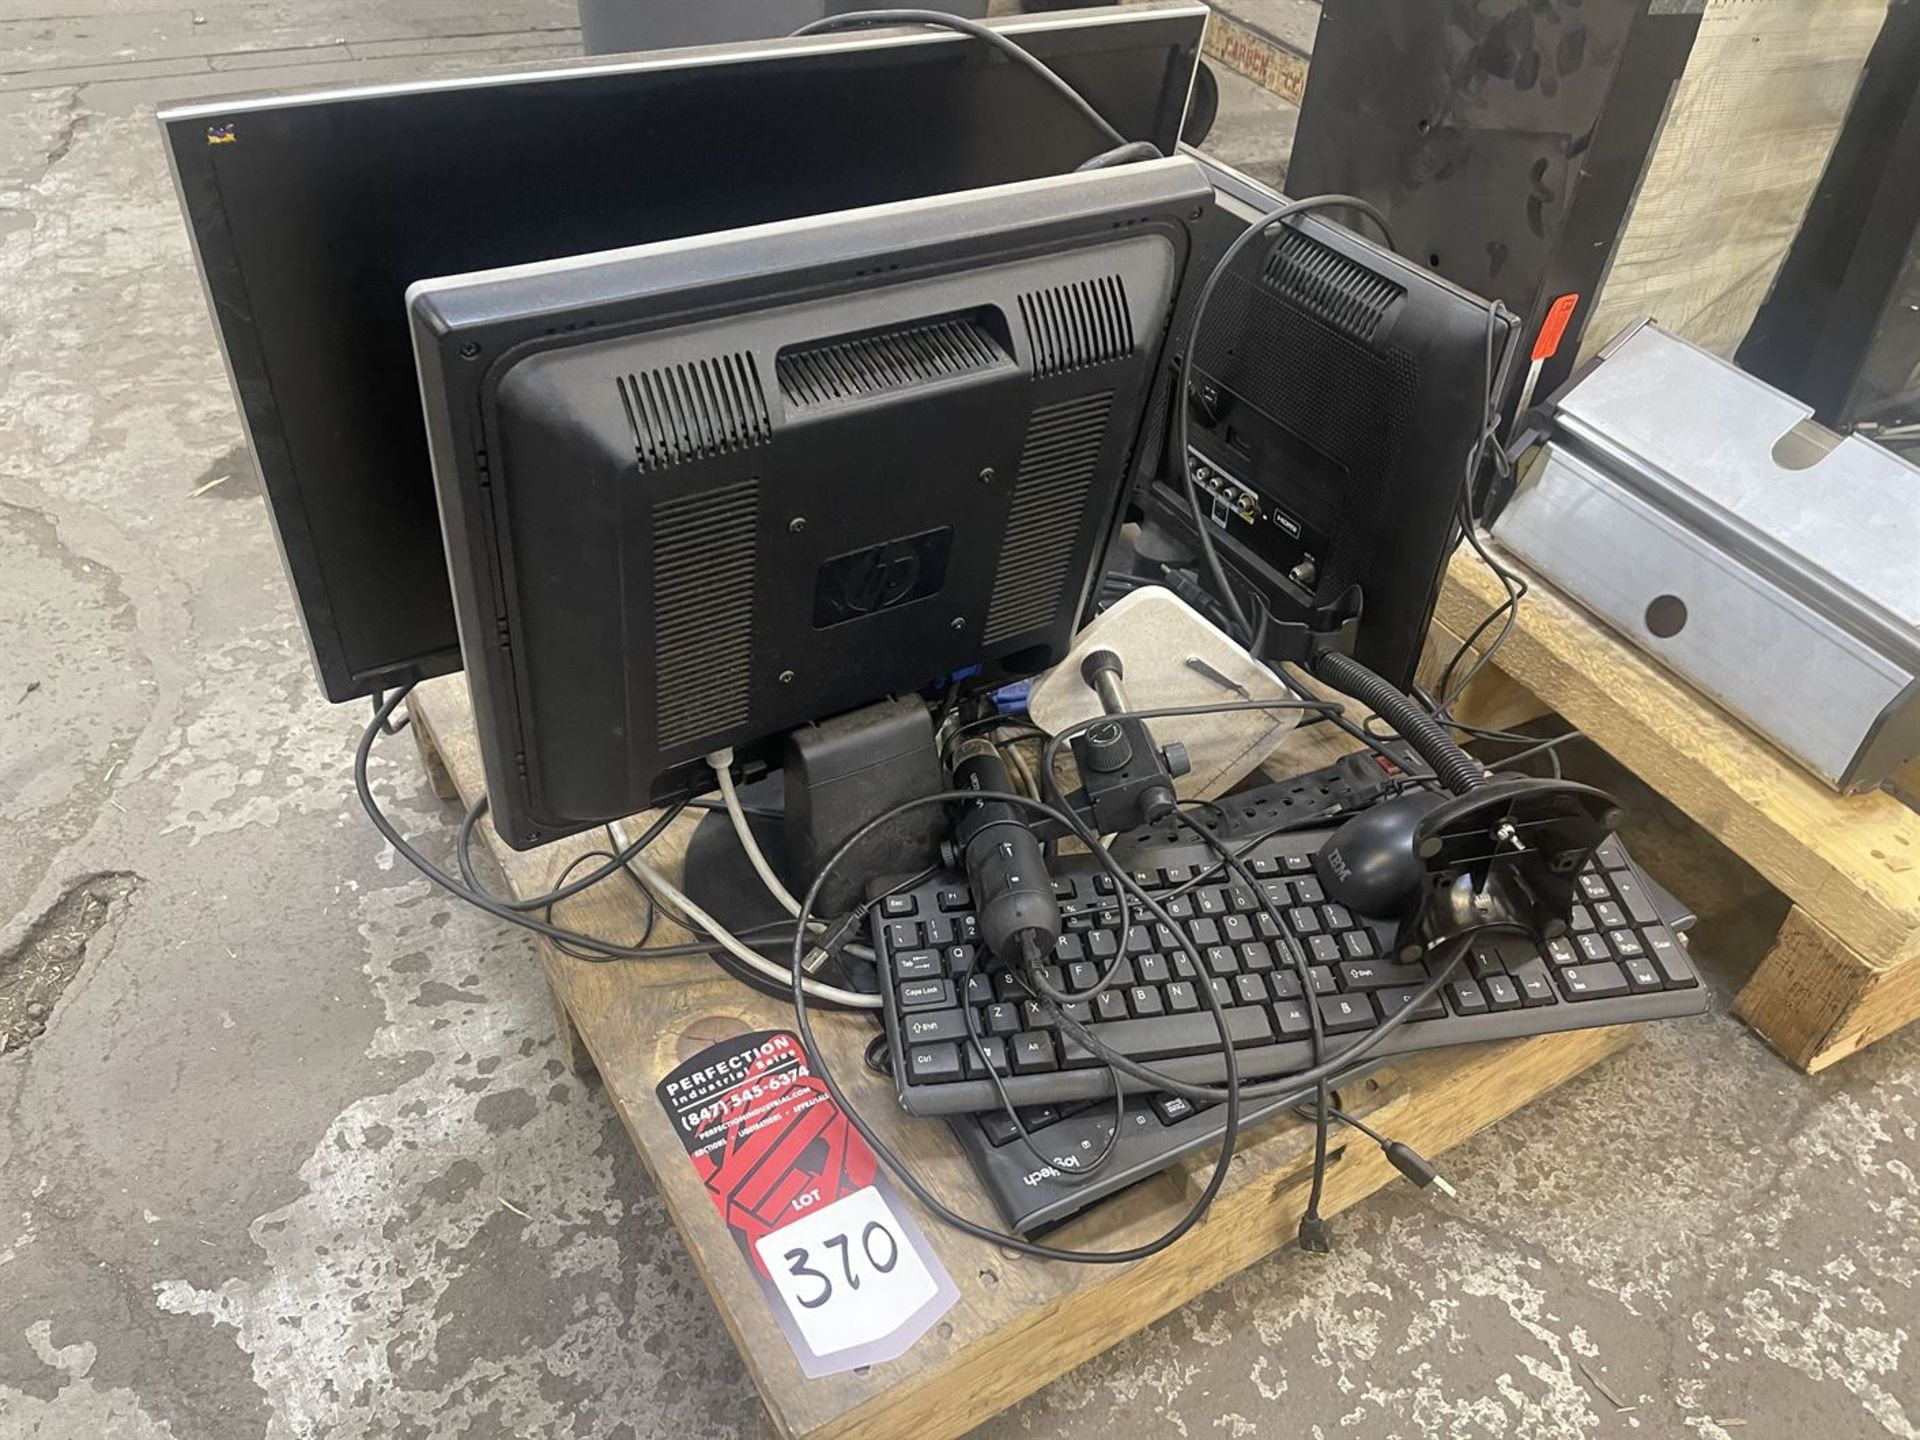 Lot of Assorted computers/keyboards